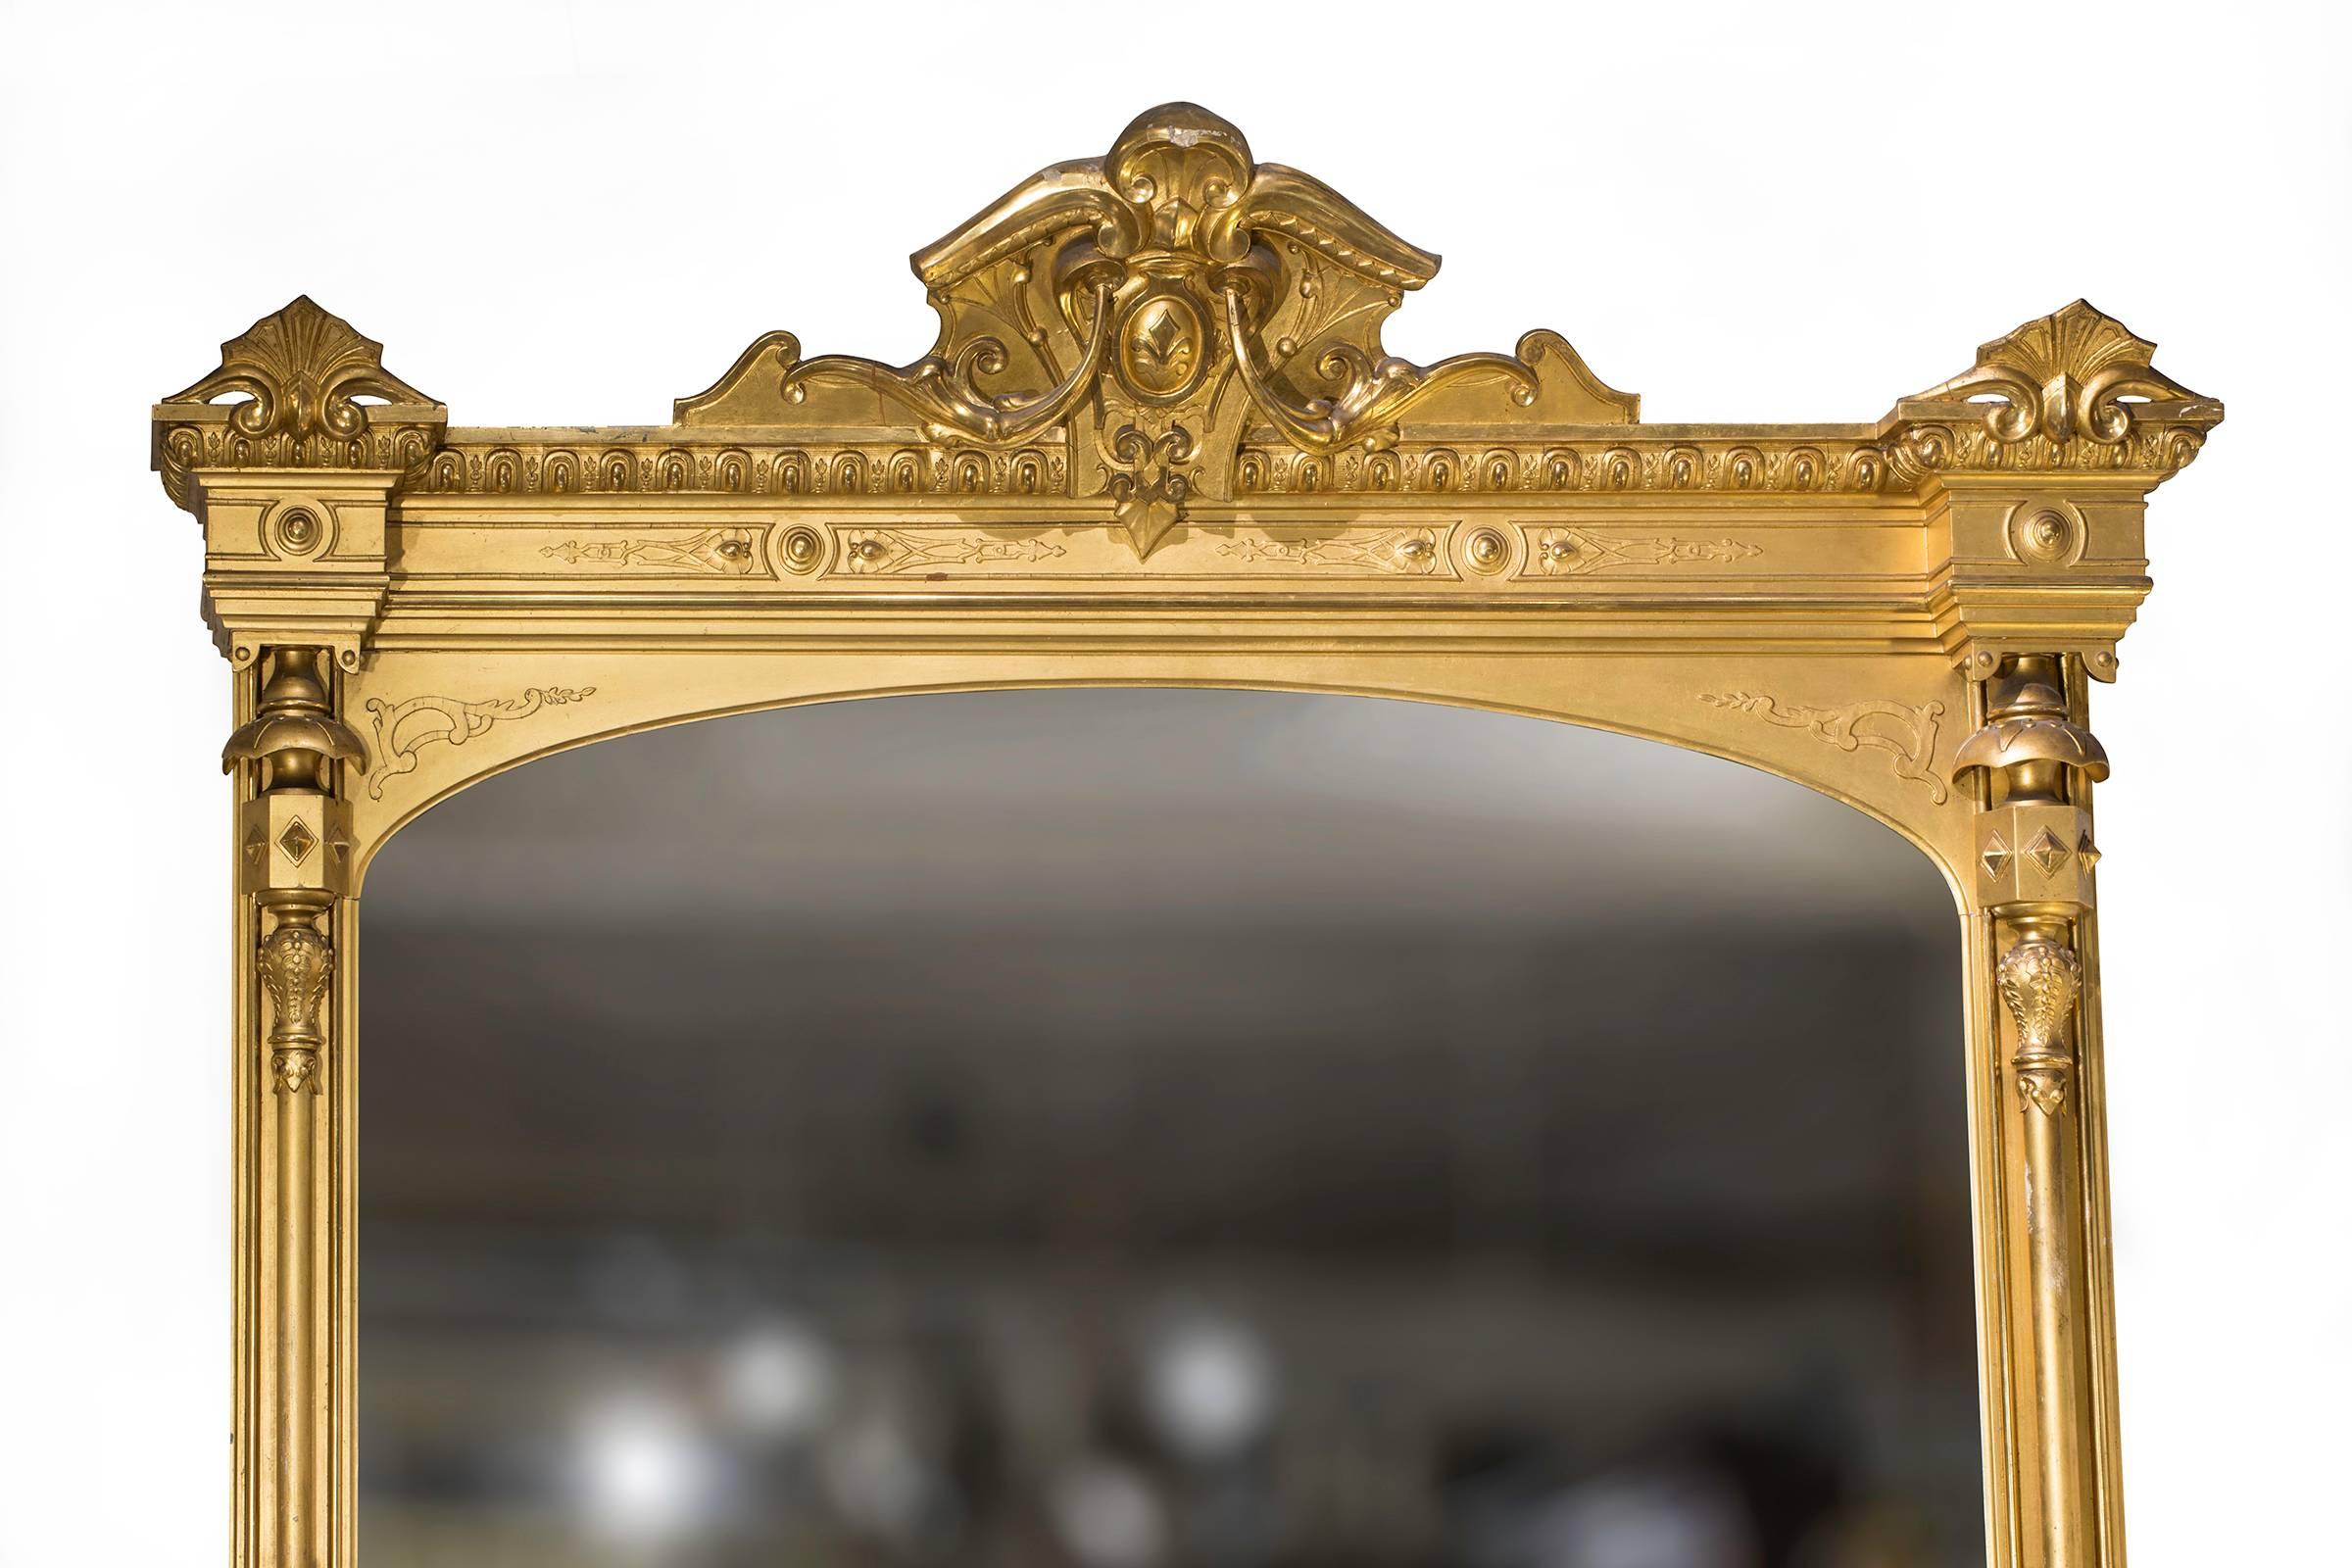 Magnificent 19th century large scale mantel mirror. Wood carved and gilded in 24-karat gold and diamond dust mirror, giving the extra sparkle. Originally graced as a over mantel mirror in a very fine estate in San Francisco.